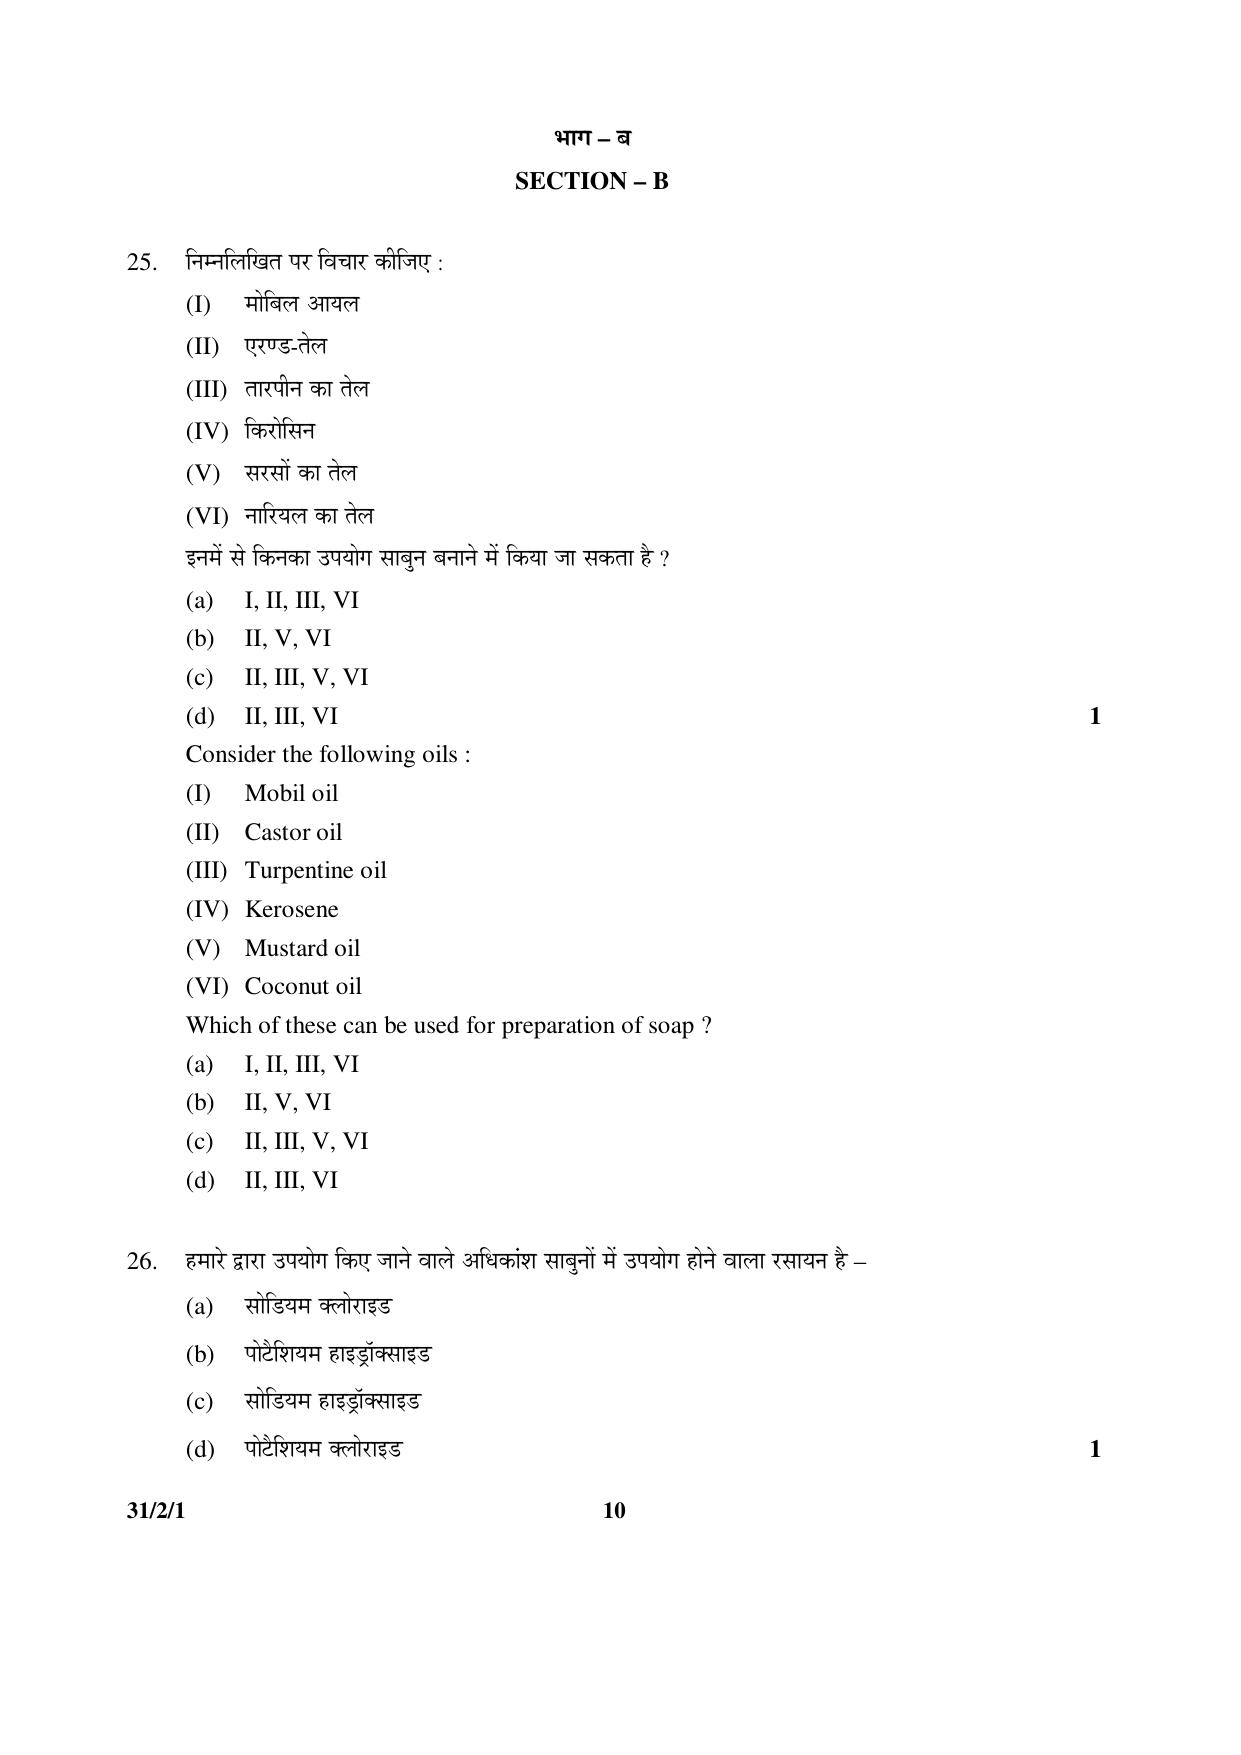 CBSE Class 10 31-2-1 _Science 2016 Question Paper - Page 10